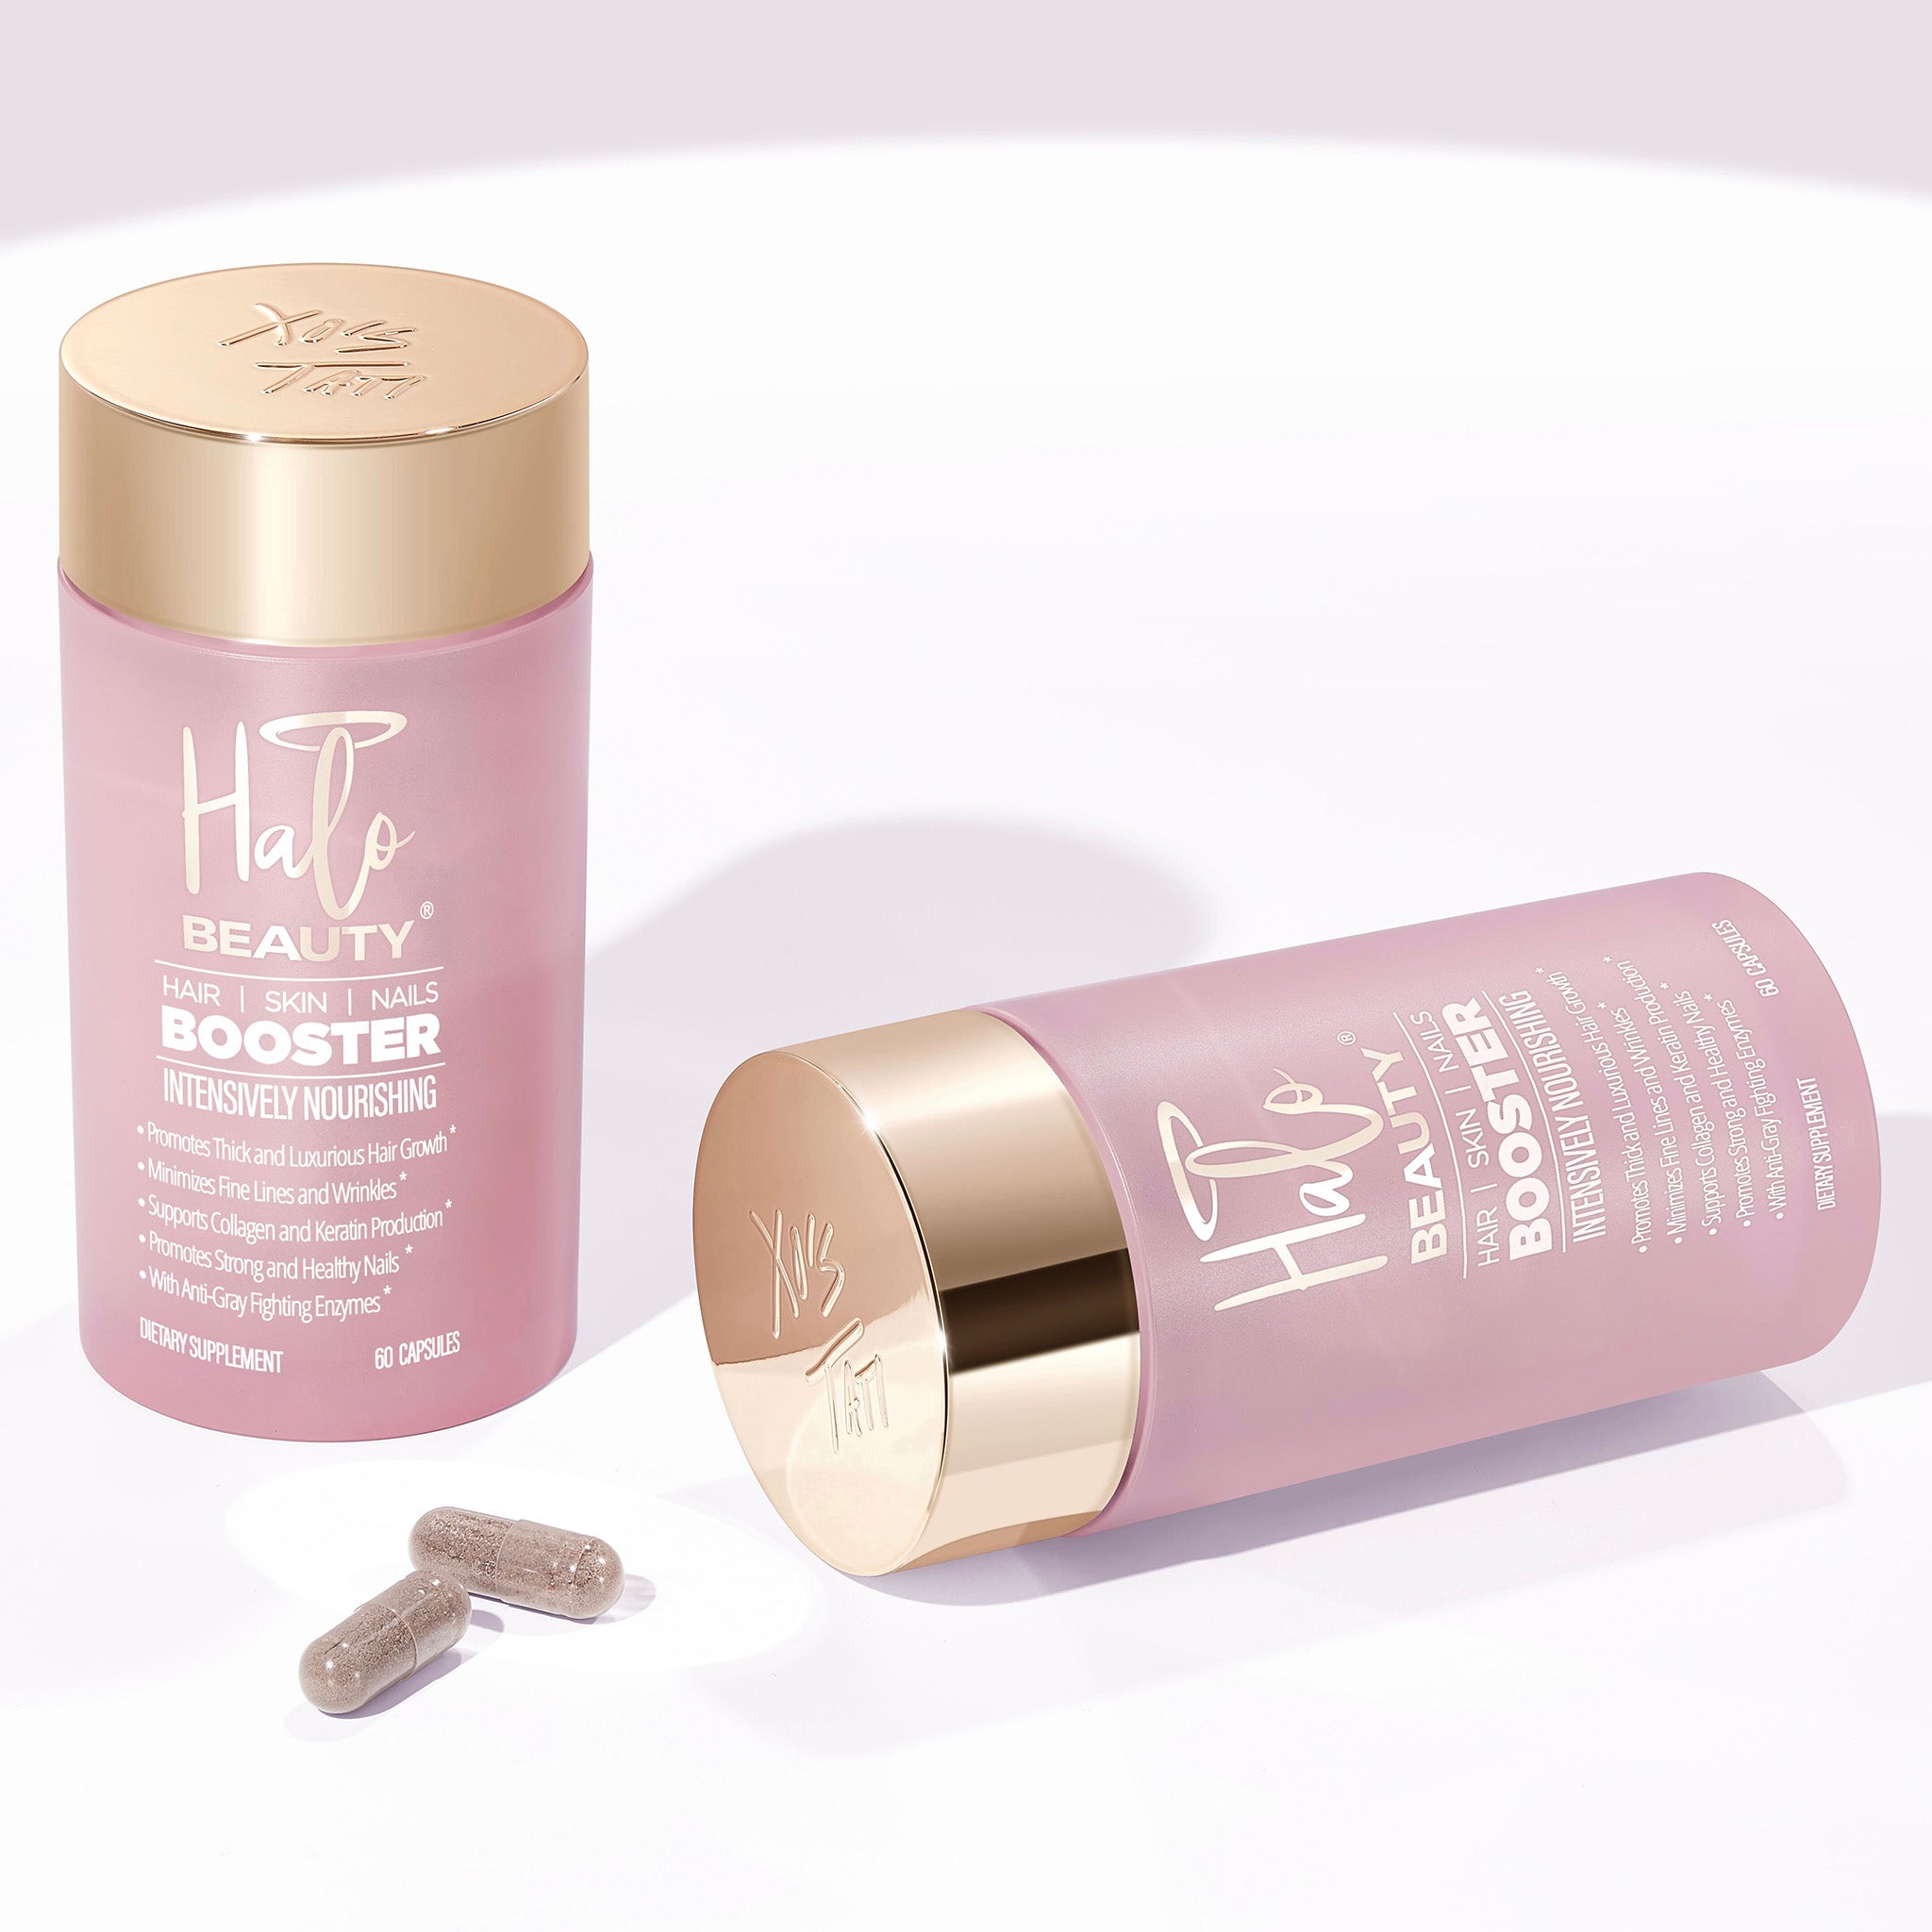 Halo Beauty Hair, Skin, & Nails Booster